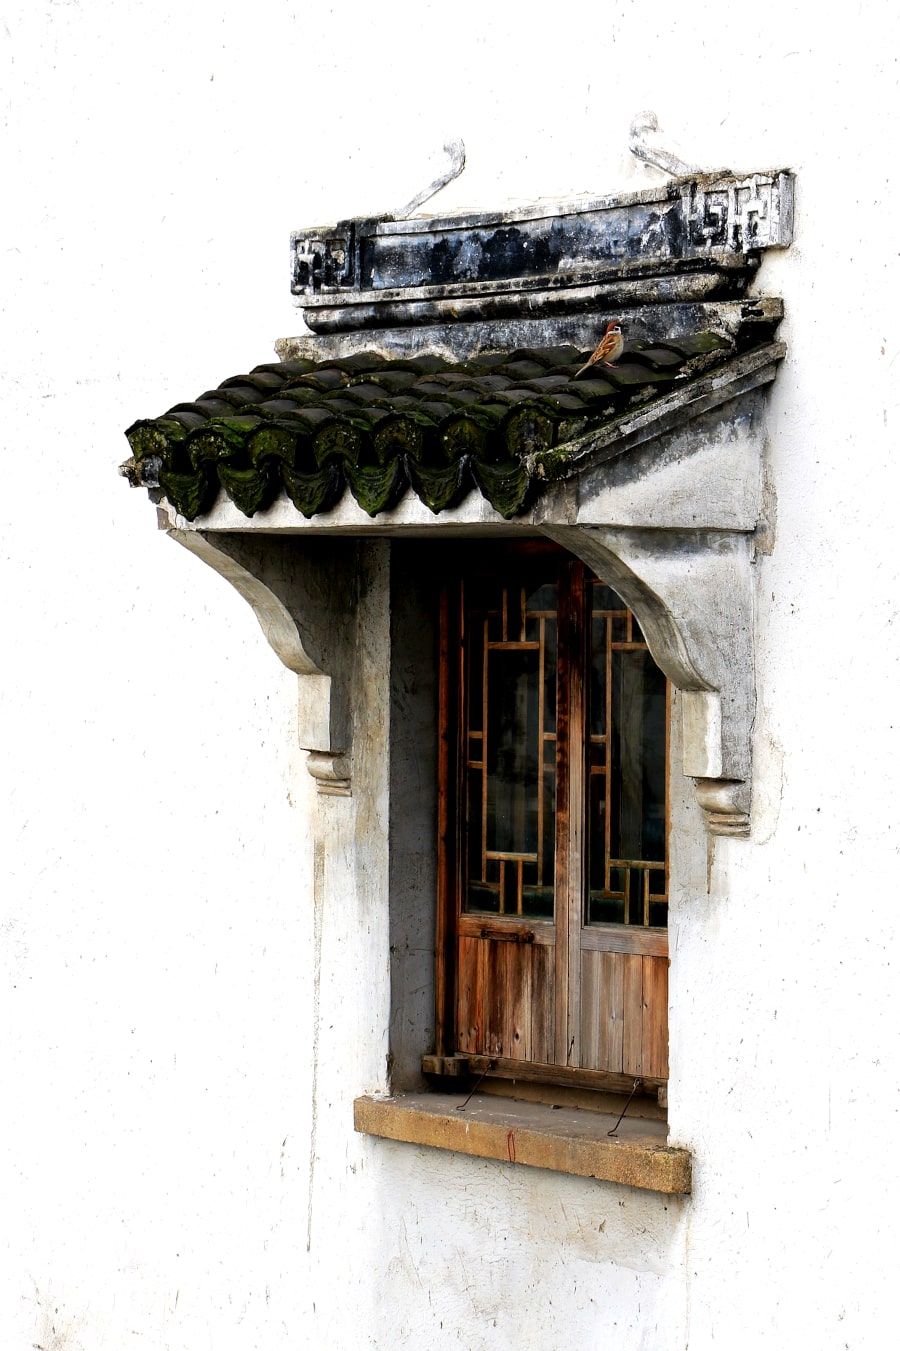 Traditional Chinese window in the ancient town of Fengjing near Shanghai in China